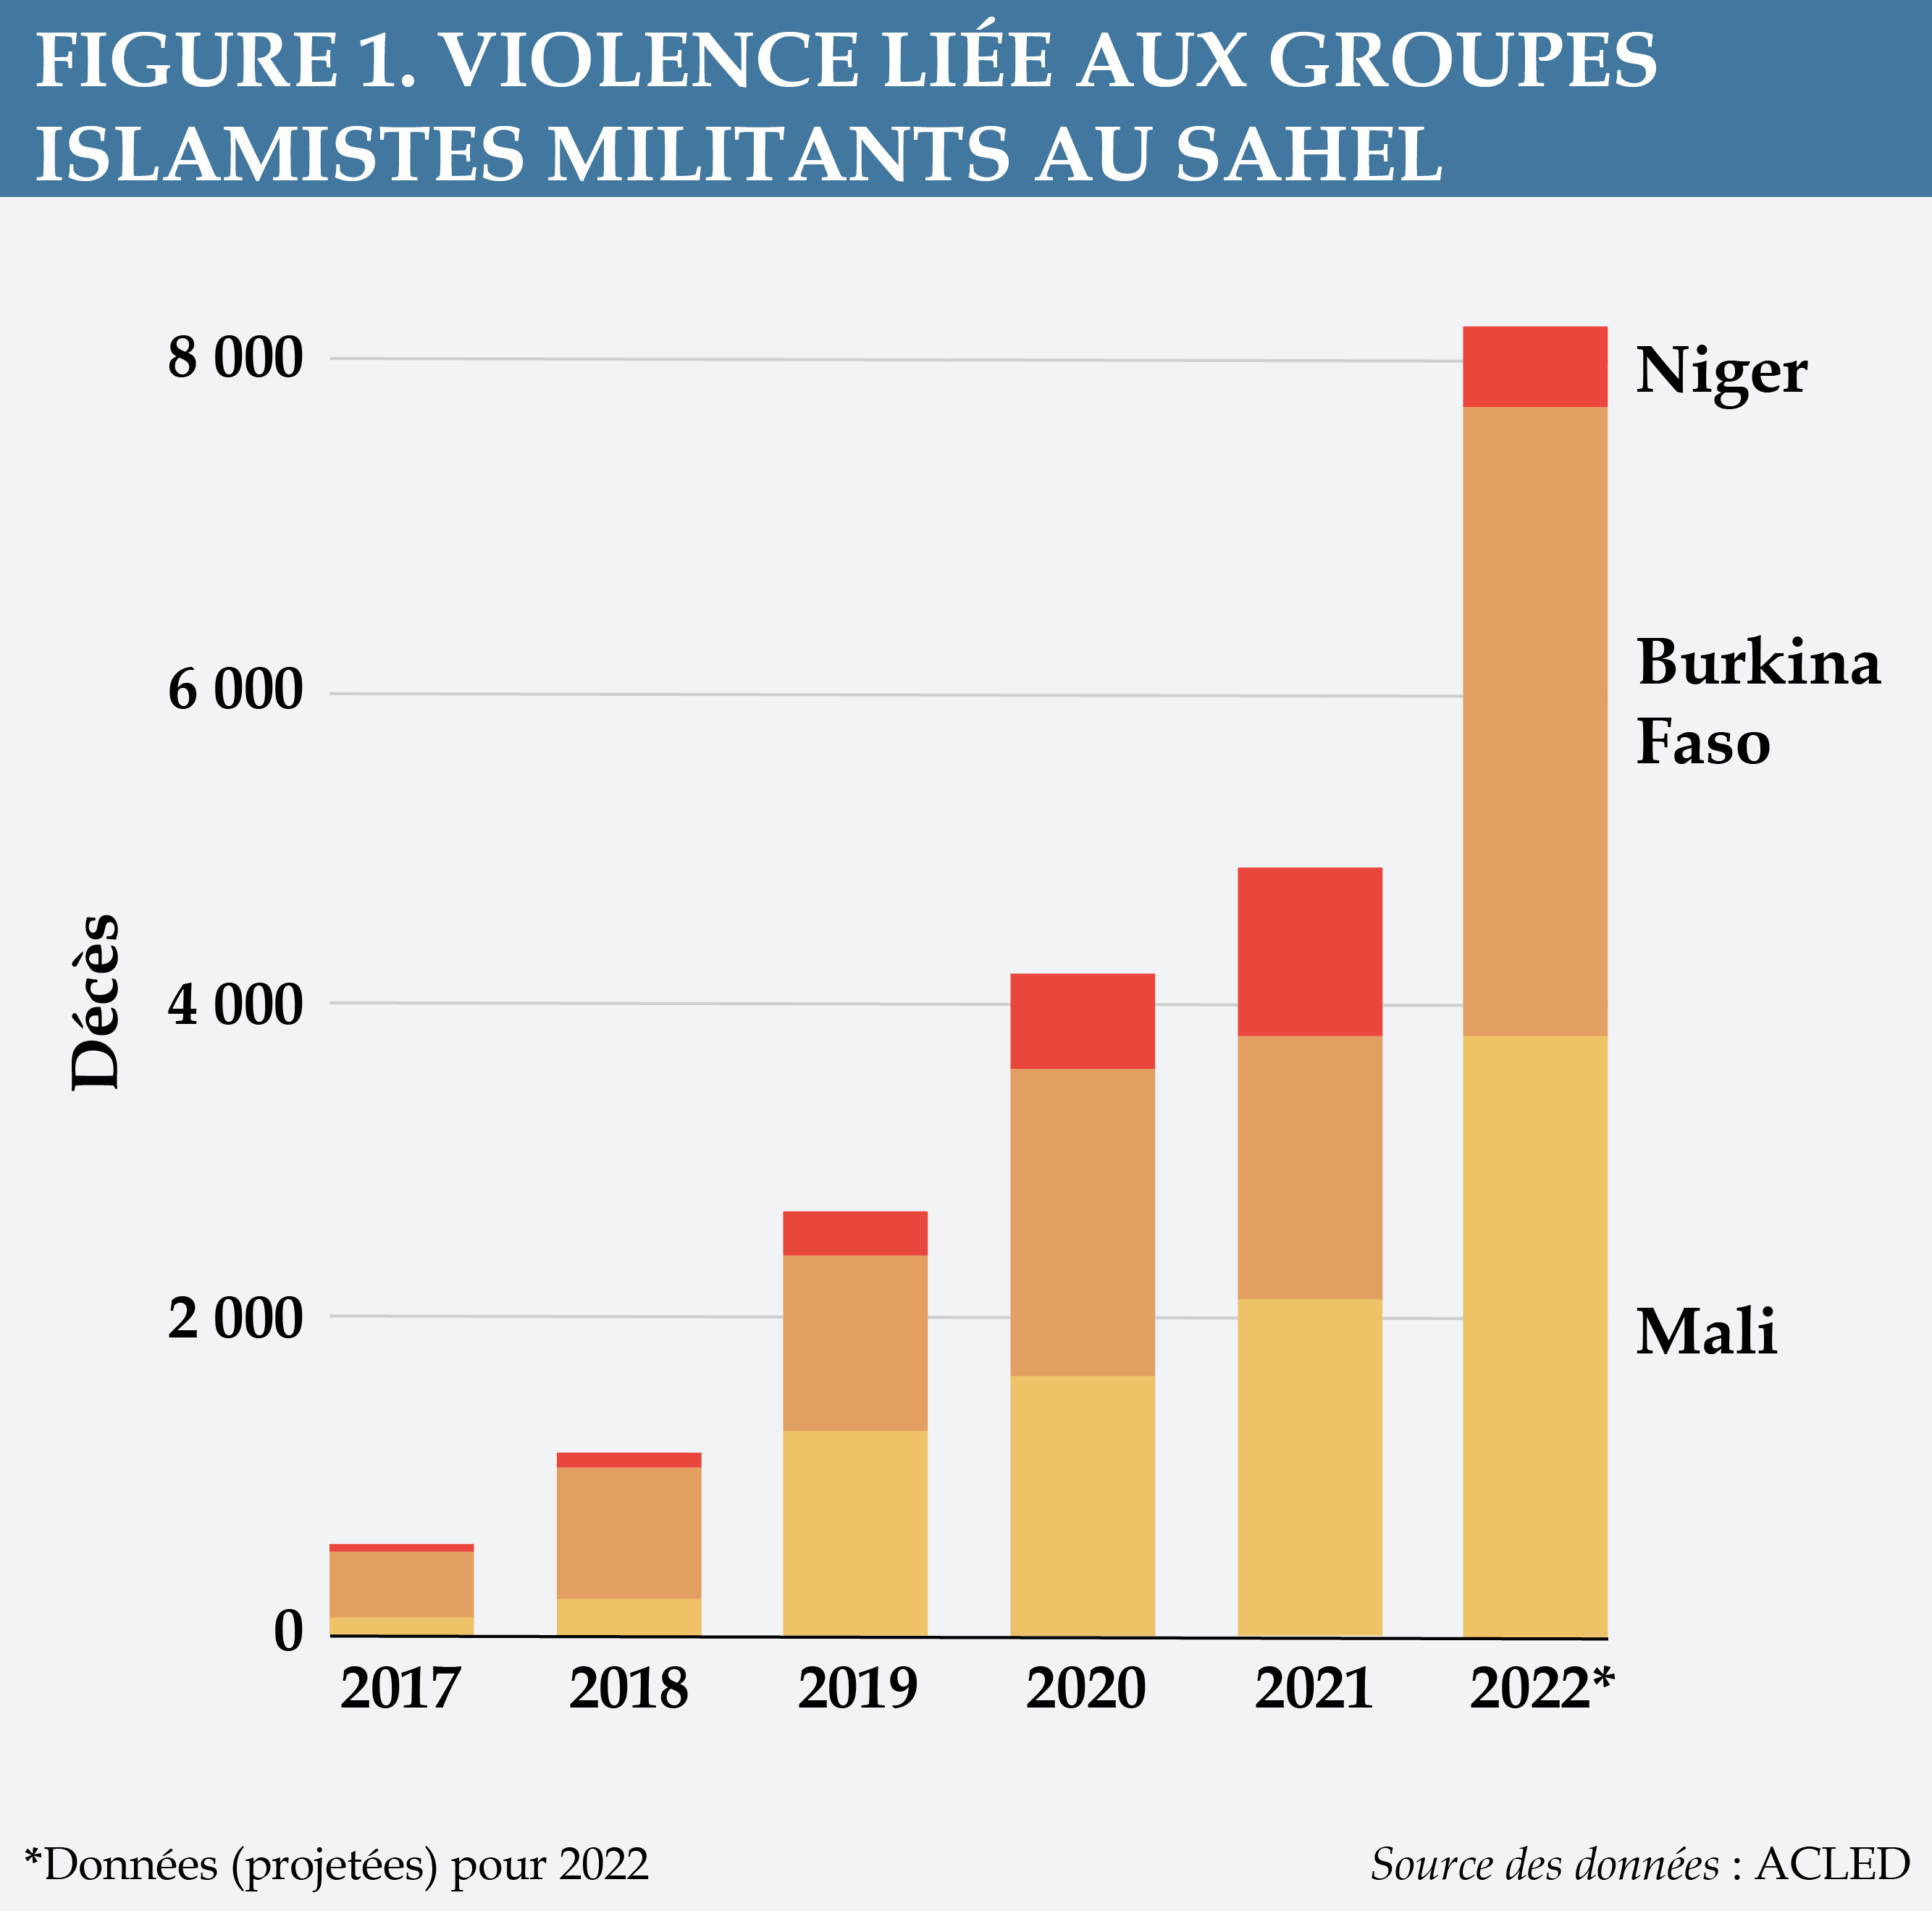 ASB41 Figure 1: Violence Linked to Militant Islamist Groups in the Sahel